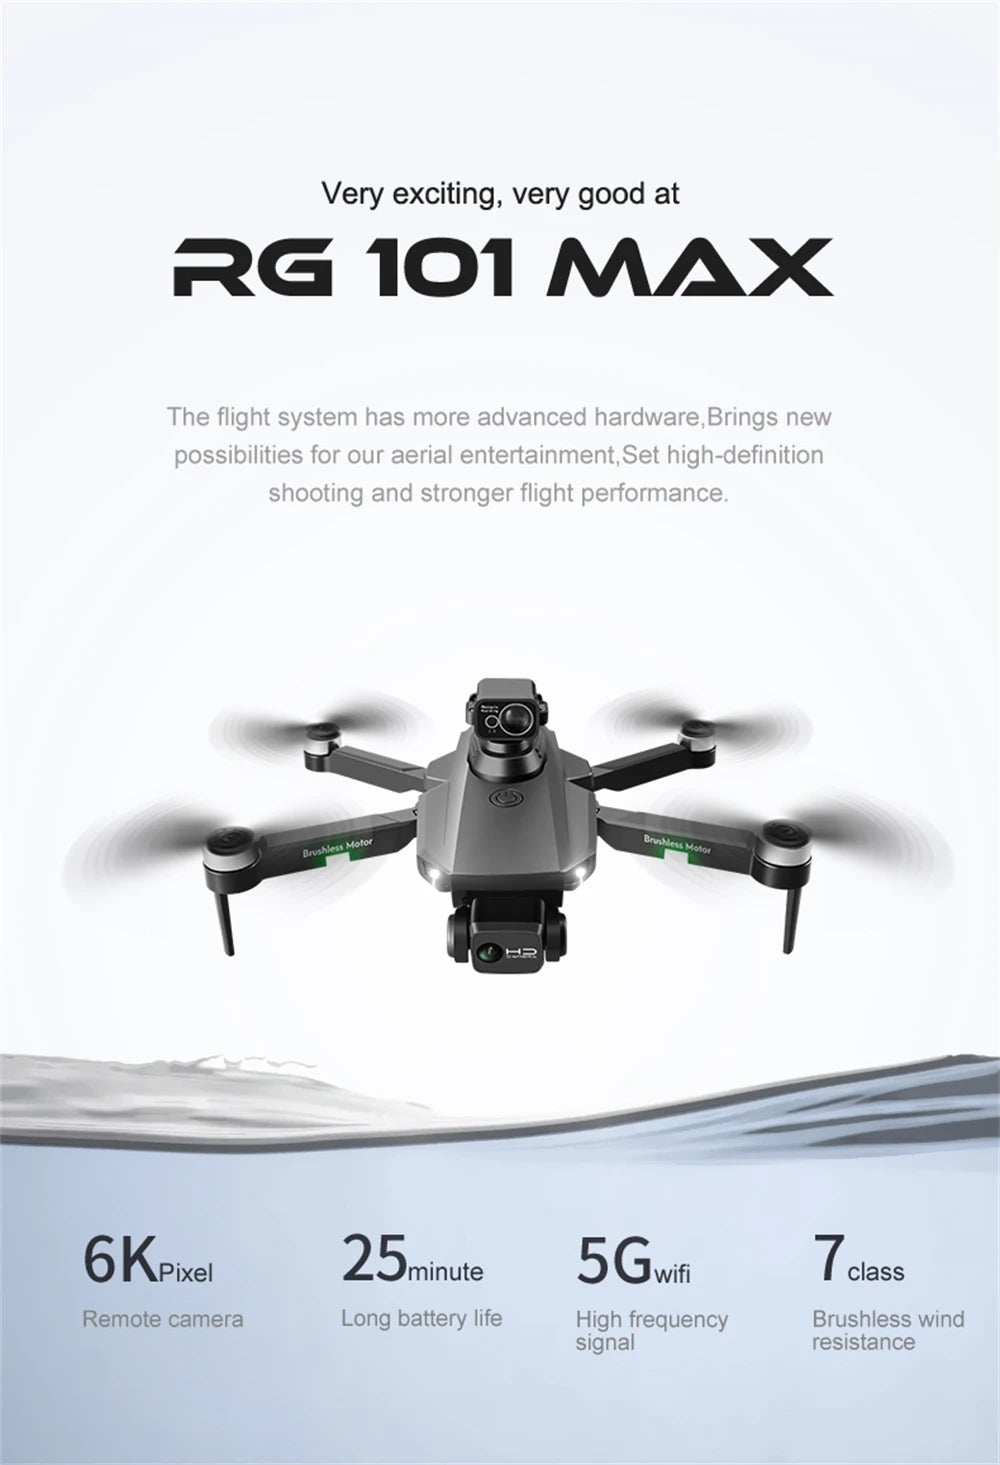 RG101 MAX Drone, high-definition shooting and stronger flight performance at RG 101 MAX . 